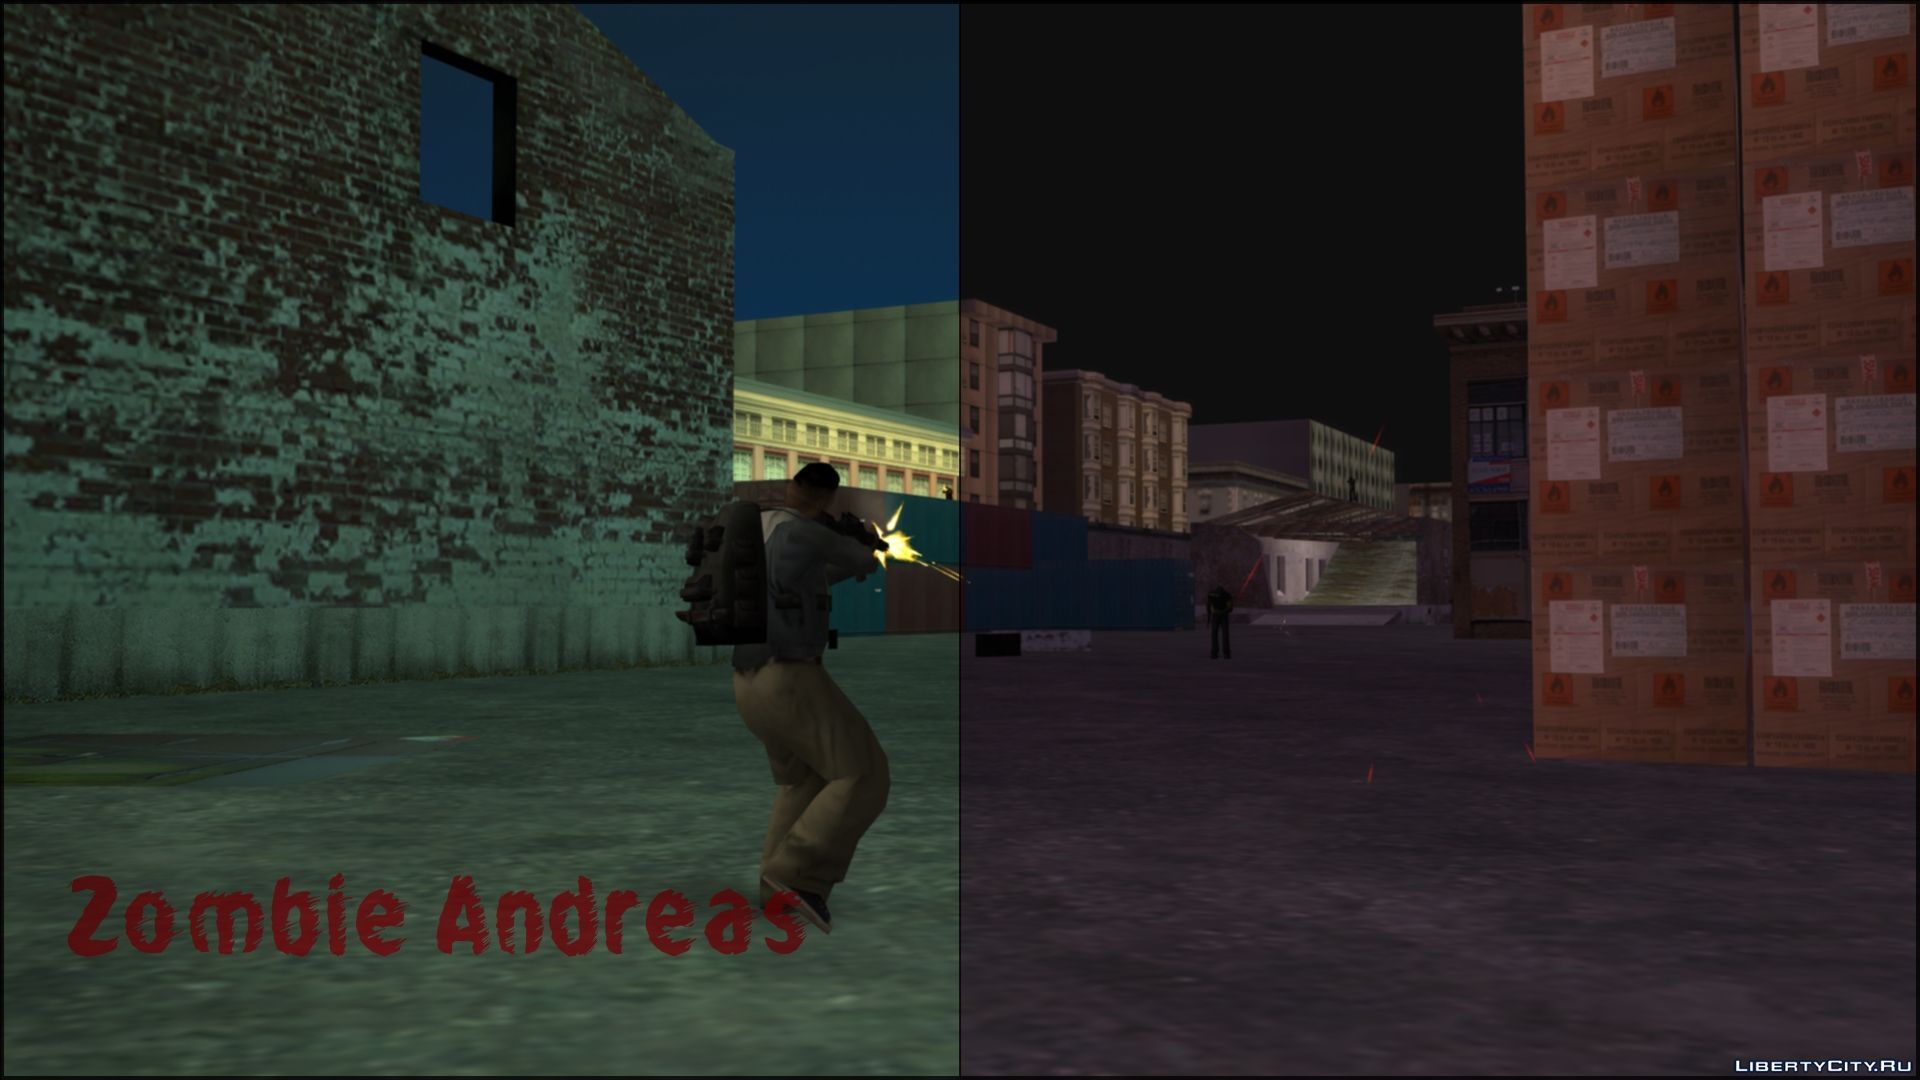 Zombie andreas final